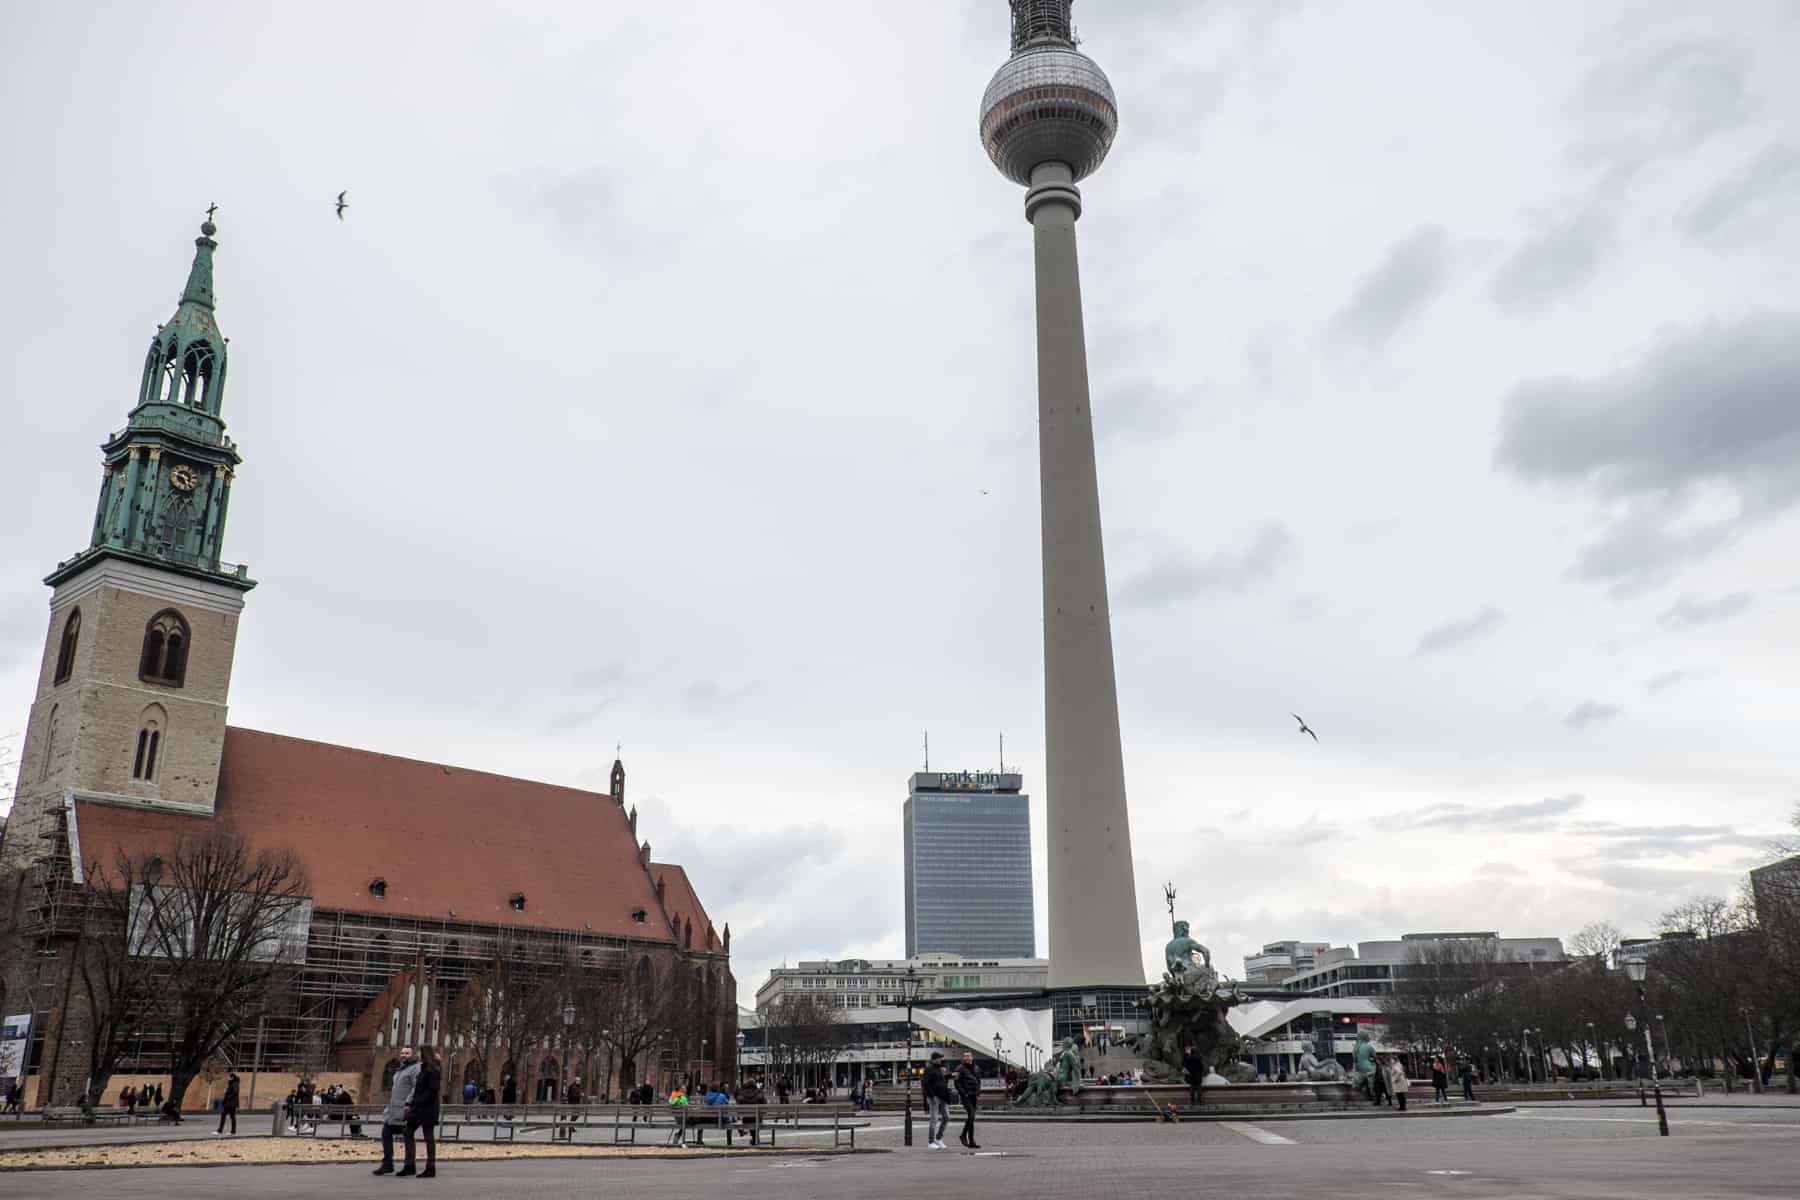 A church to the left and the TV Tower of Alexanderplatz in Berlin with the Park Inn hotel in the background